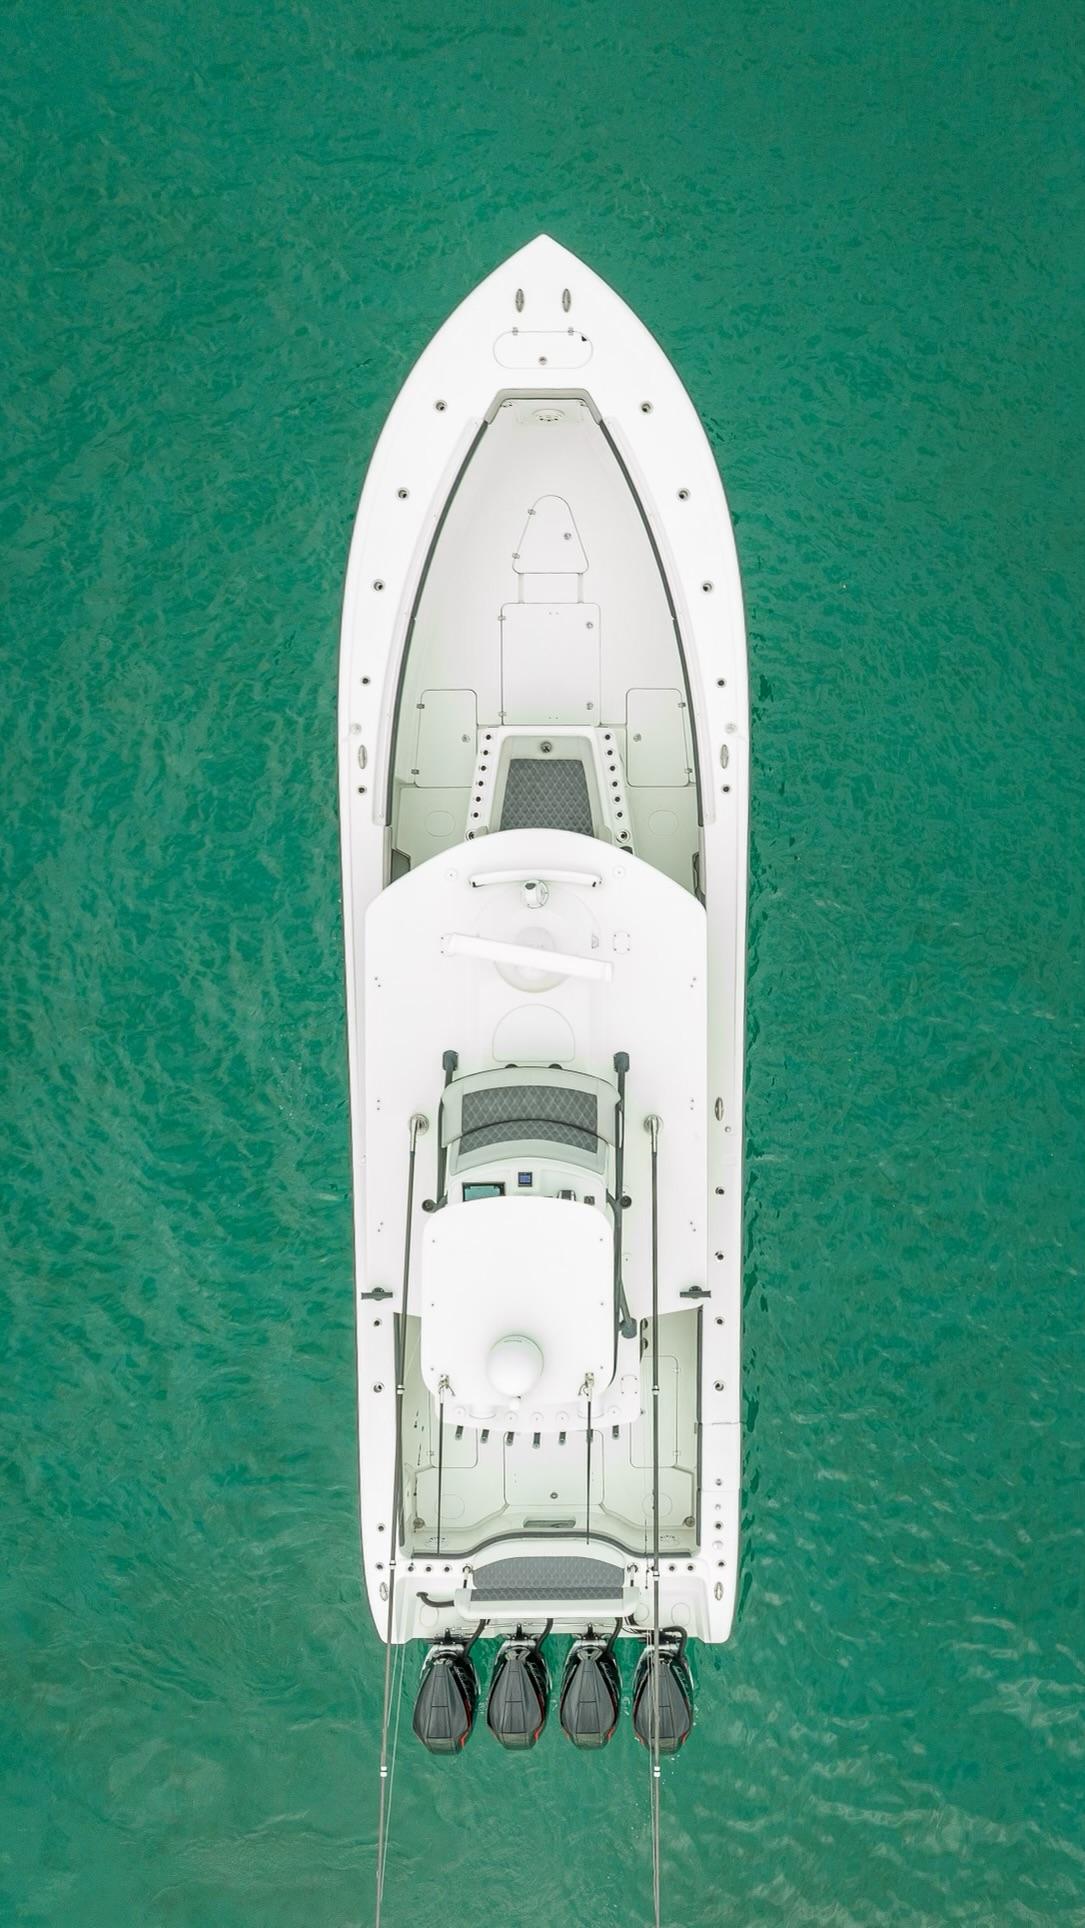 Huk's Gunwale Collection Provides Big Performance At A Reasonable Price